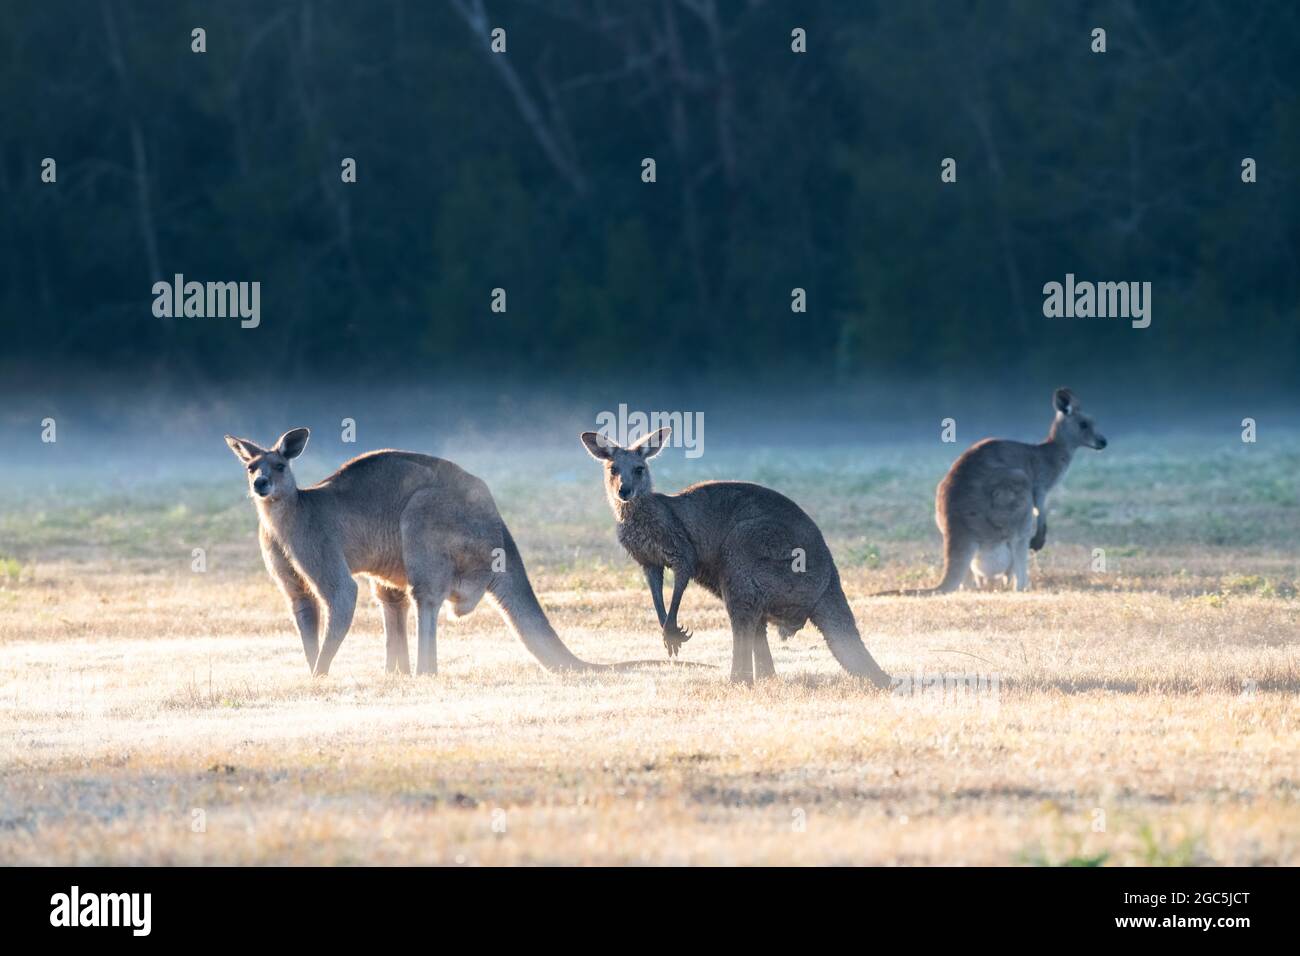 Three kangaroos standing in an open land on a misty winter morning. Stock Photo